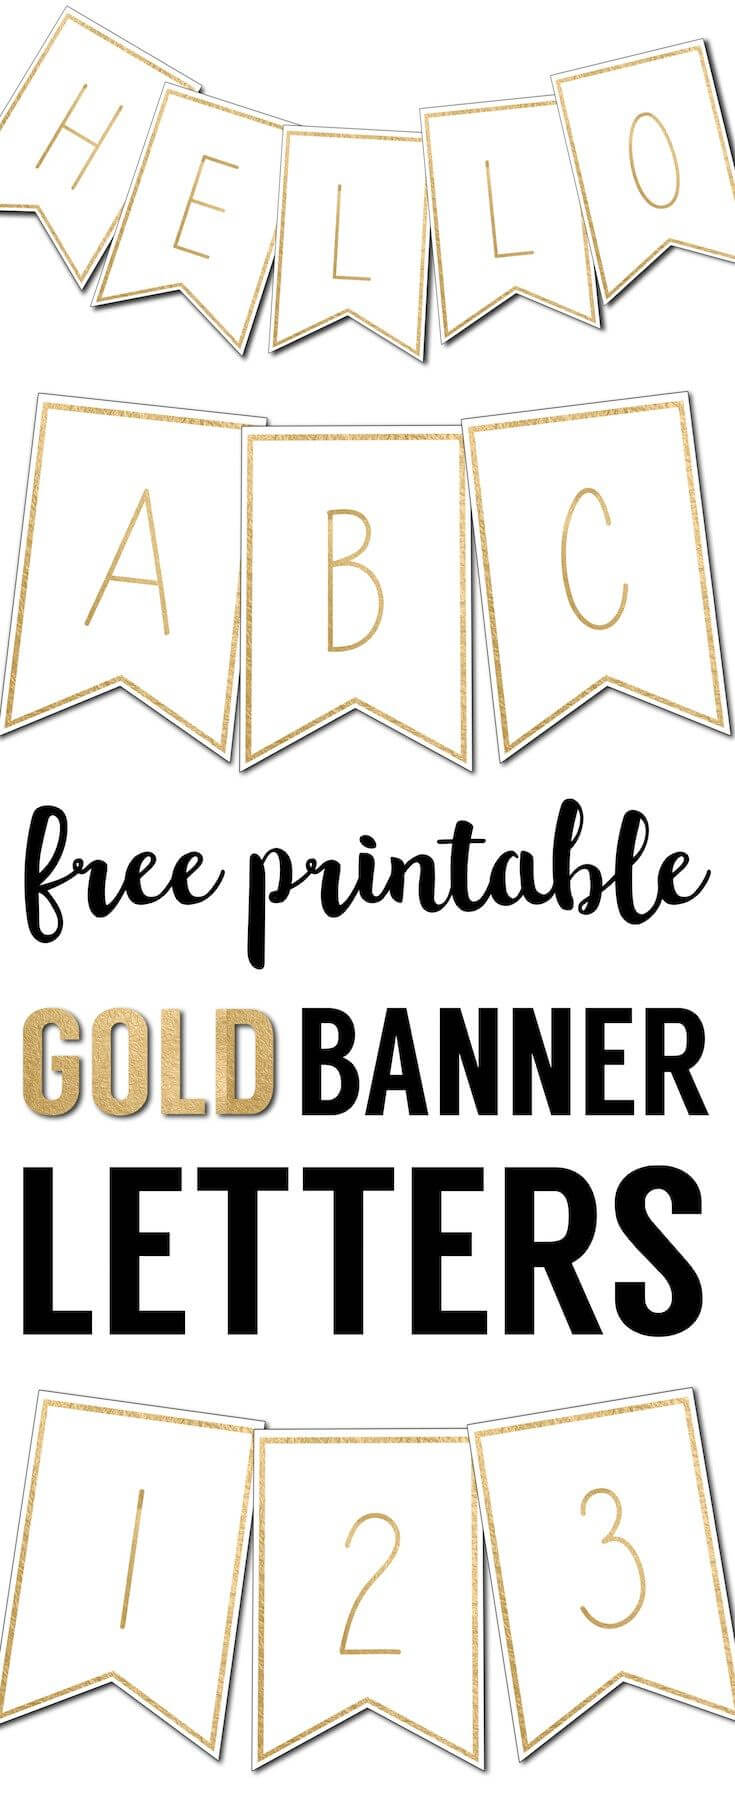 Free Printable Banner Letters Templates | Printable Banner Regarding Bride To Be Banner Template